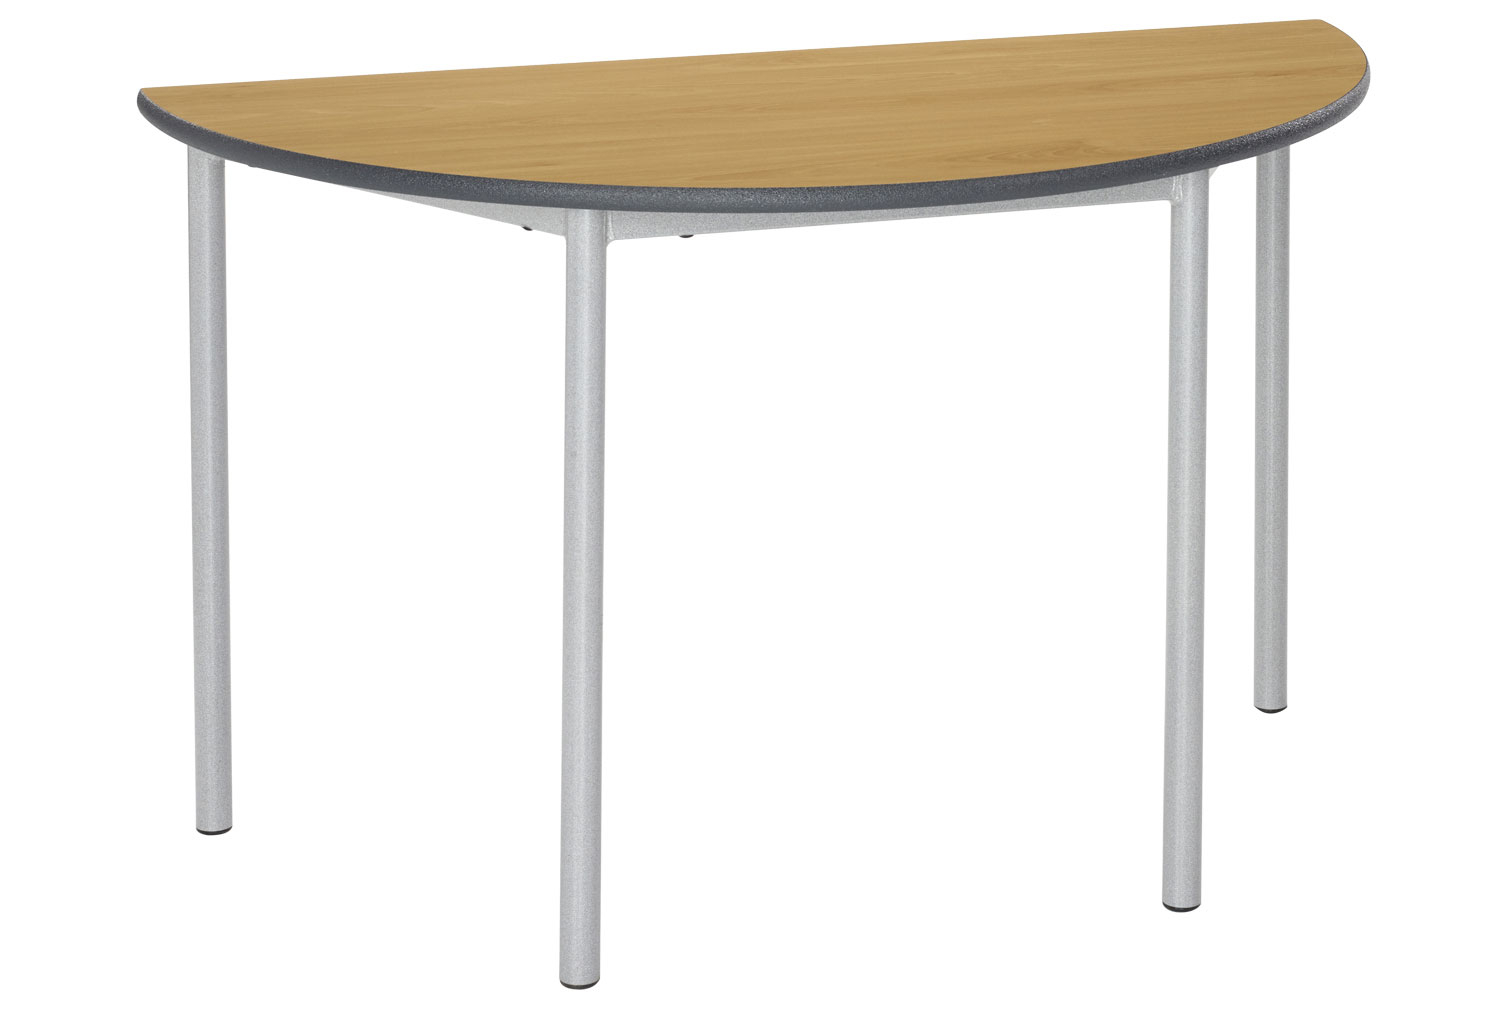 Qty 4 - RT32 Semi Circular Classroom Tables 8-11 Years, 120wx60dx64h (cm), Speckled Grey Frame, Oak Top, MDF Beech Edge